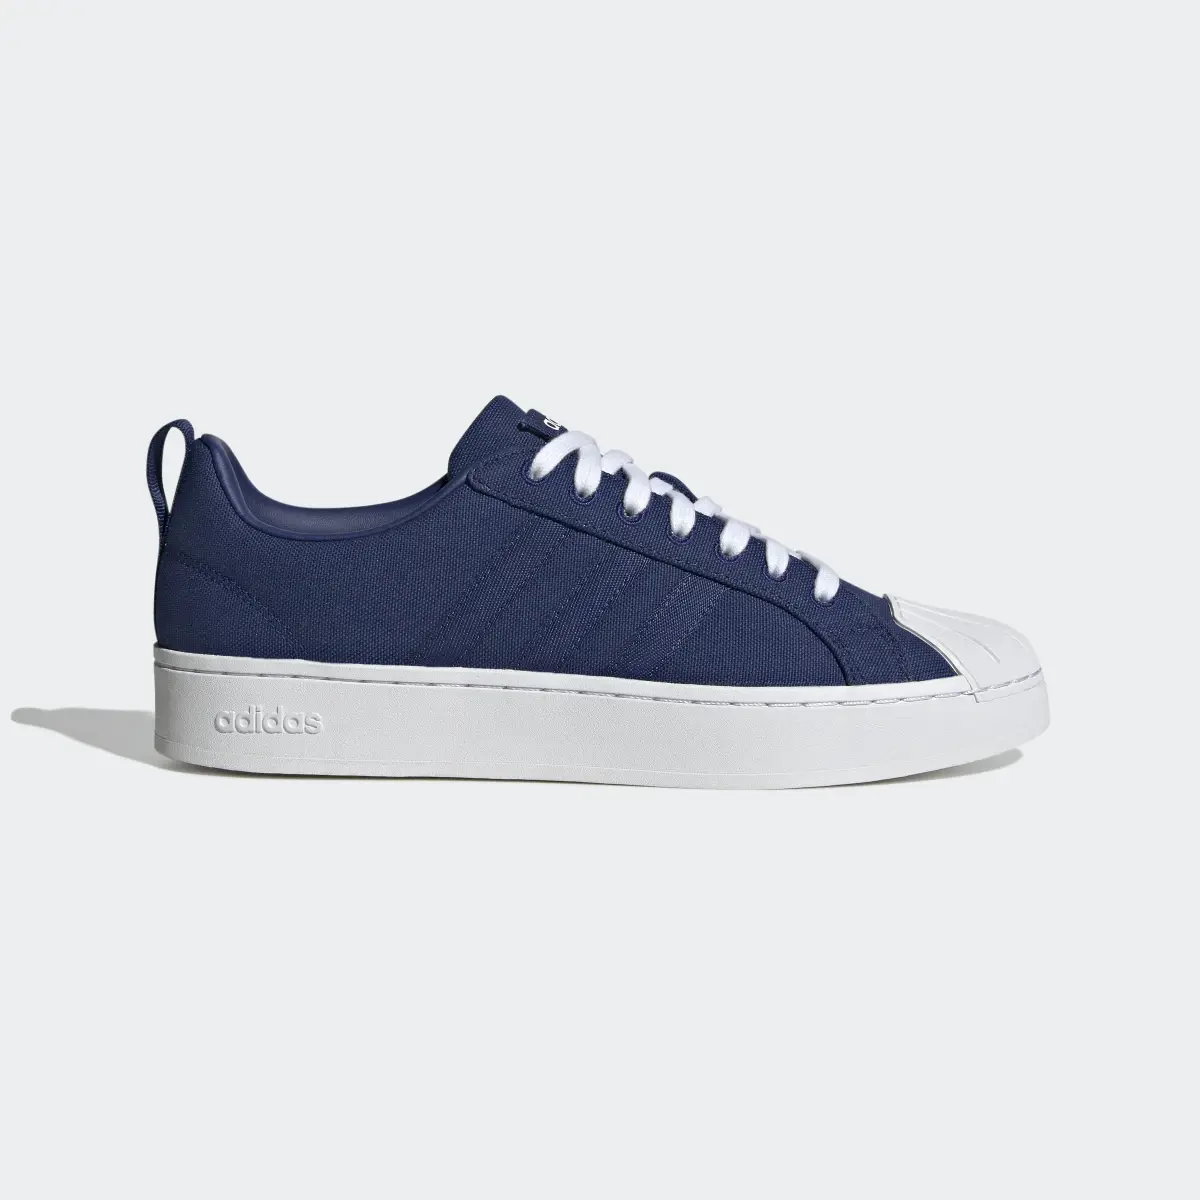 Adidas Streetcheck Cloudfoam Lifestyle Low Court Shoes. 2